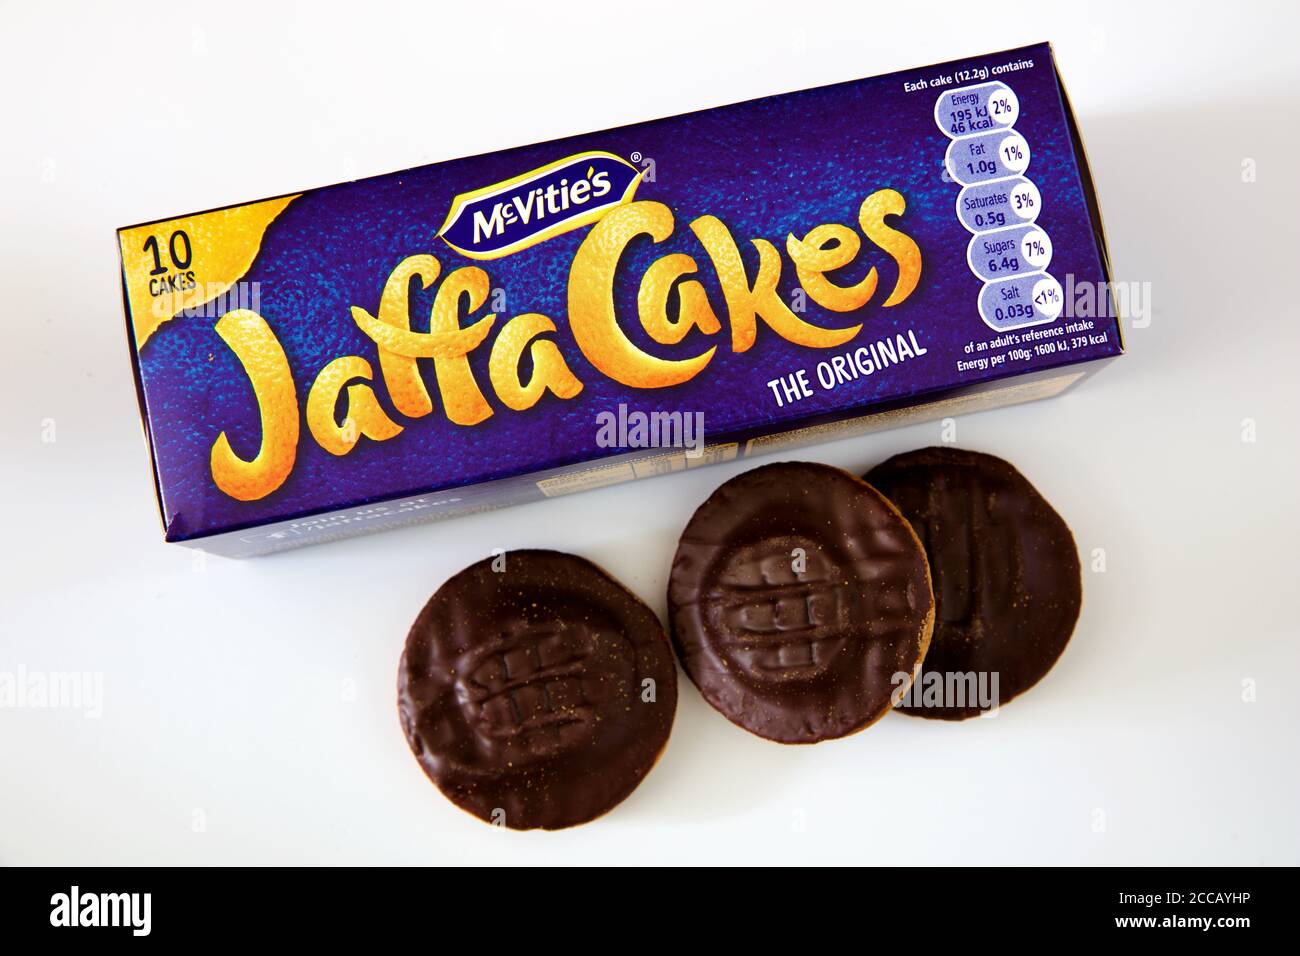 Tesco Jaffa Cake (430g) - Compare Prices & Where To Buy - Trolley.co.uk